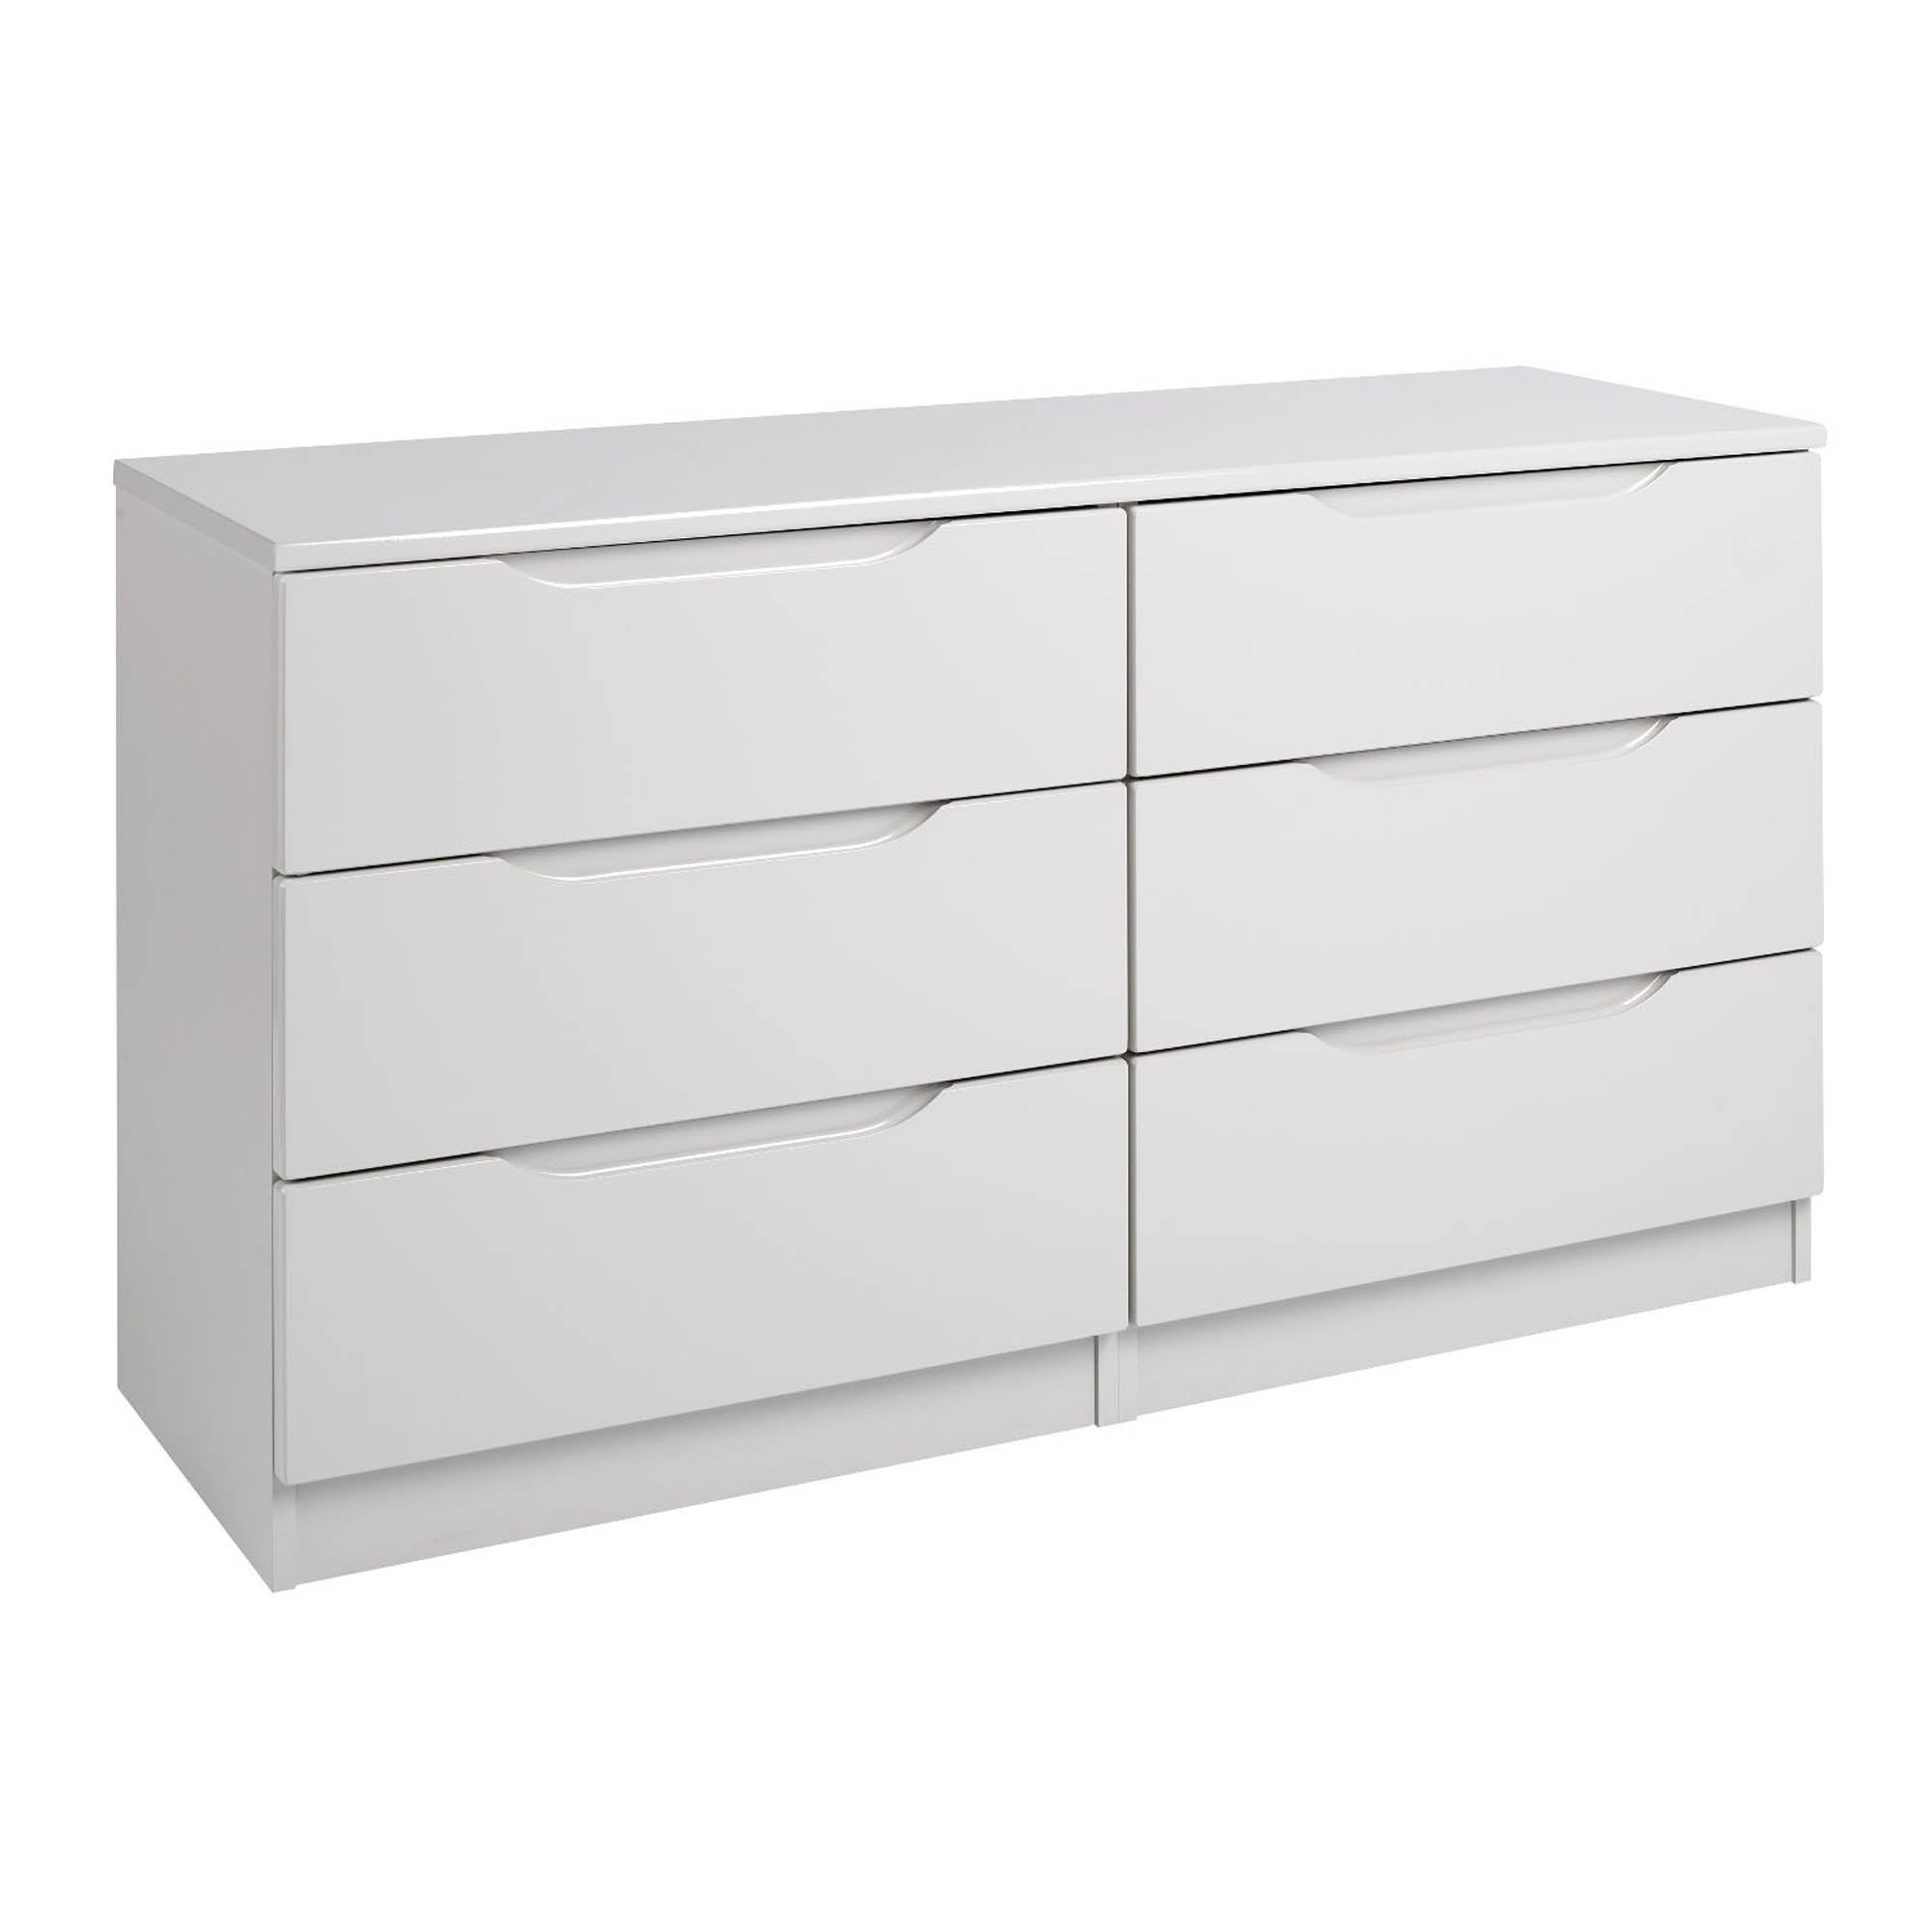 Chest of Drawers | White and Oak Chest of Drawers | Dunelm